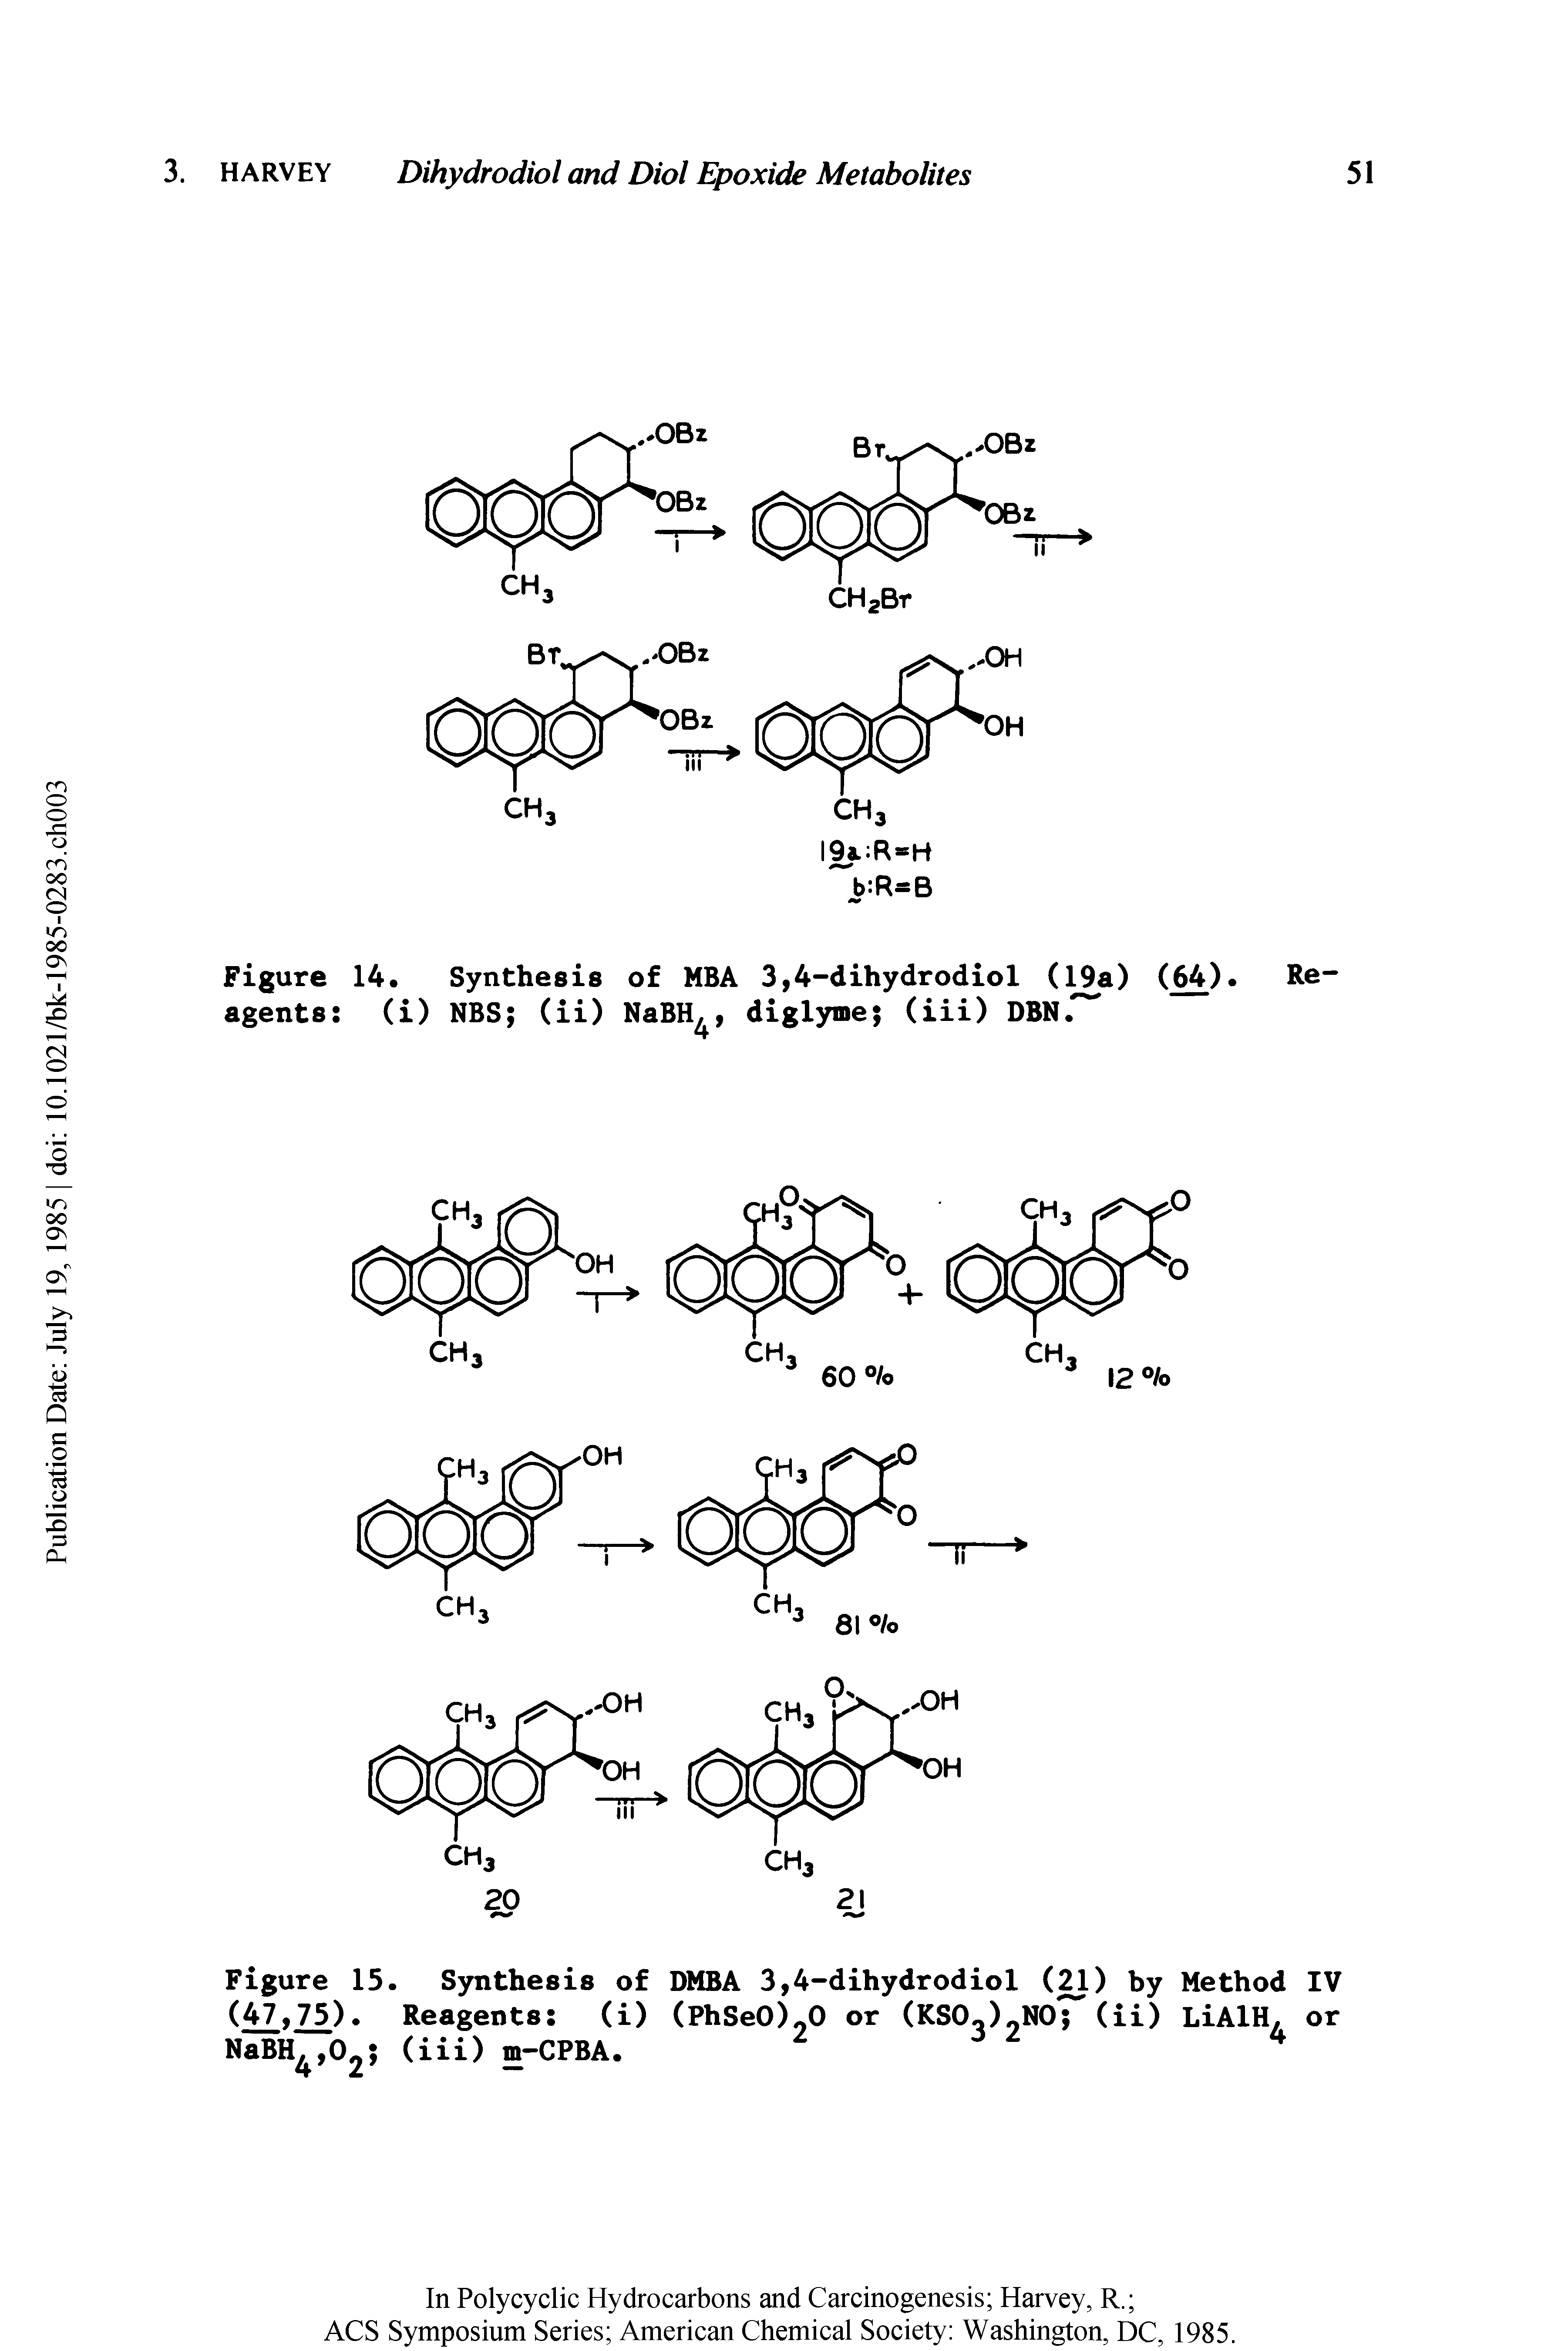 Figure 15. Synthesis of DMBA 3,4-dihydrodiol (21) by Method IV (47,75). Reagents (i) (PhSe0)20 or (KS0 )2N0 (ii) LiAlH, or NaBH4,02 (iii) m-CPBA. 4...